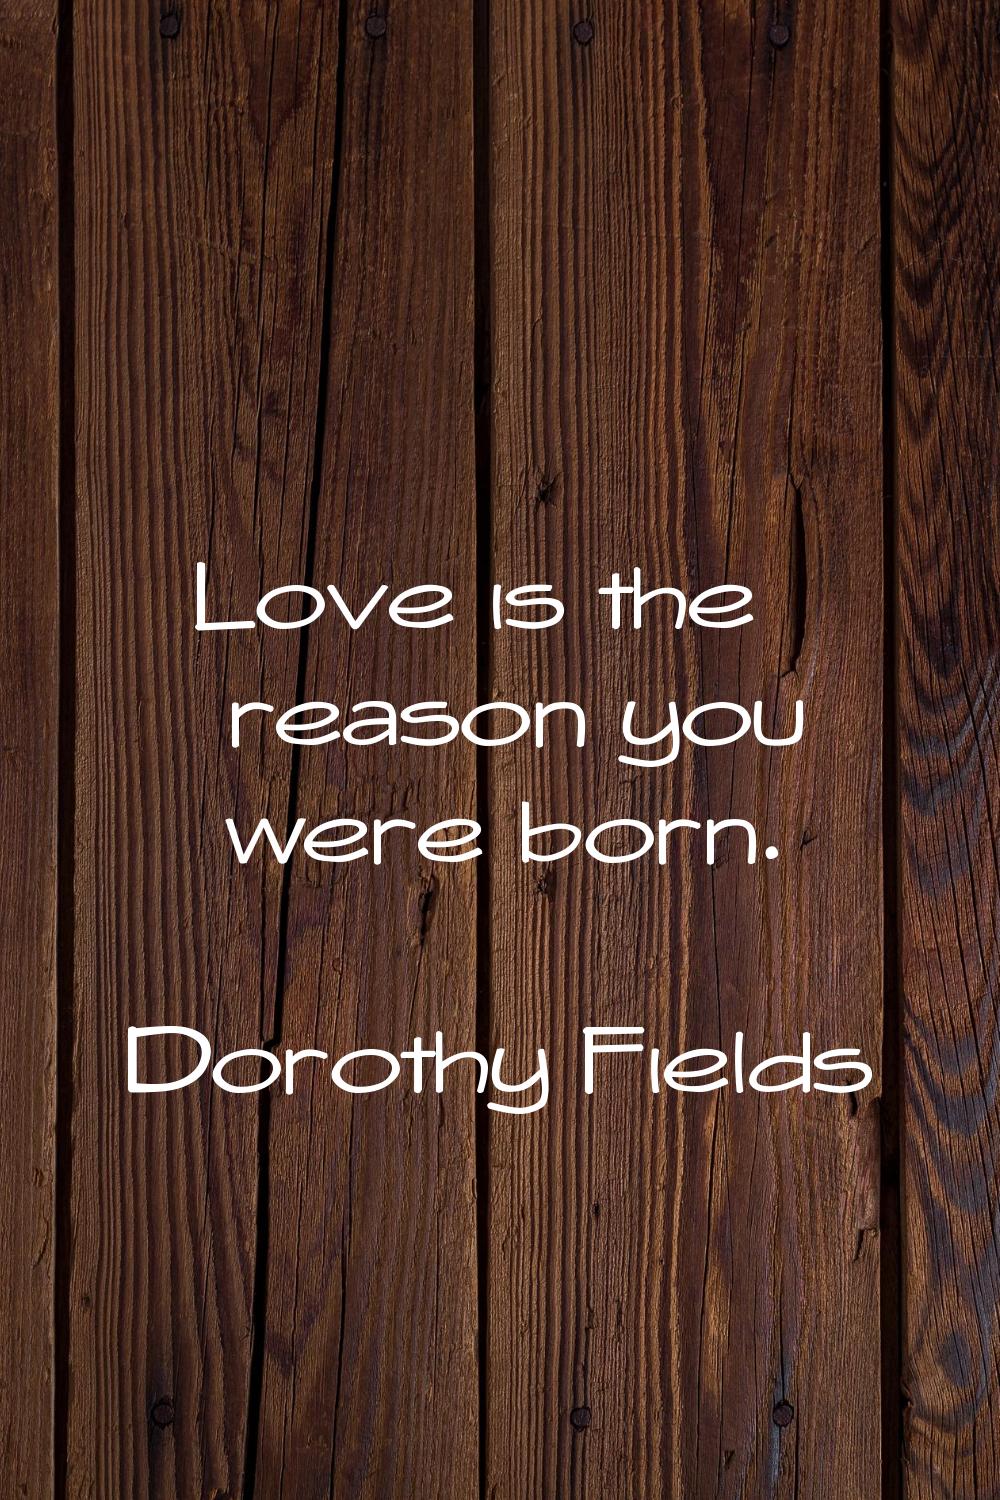 Love is the reason you were born.